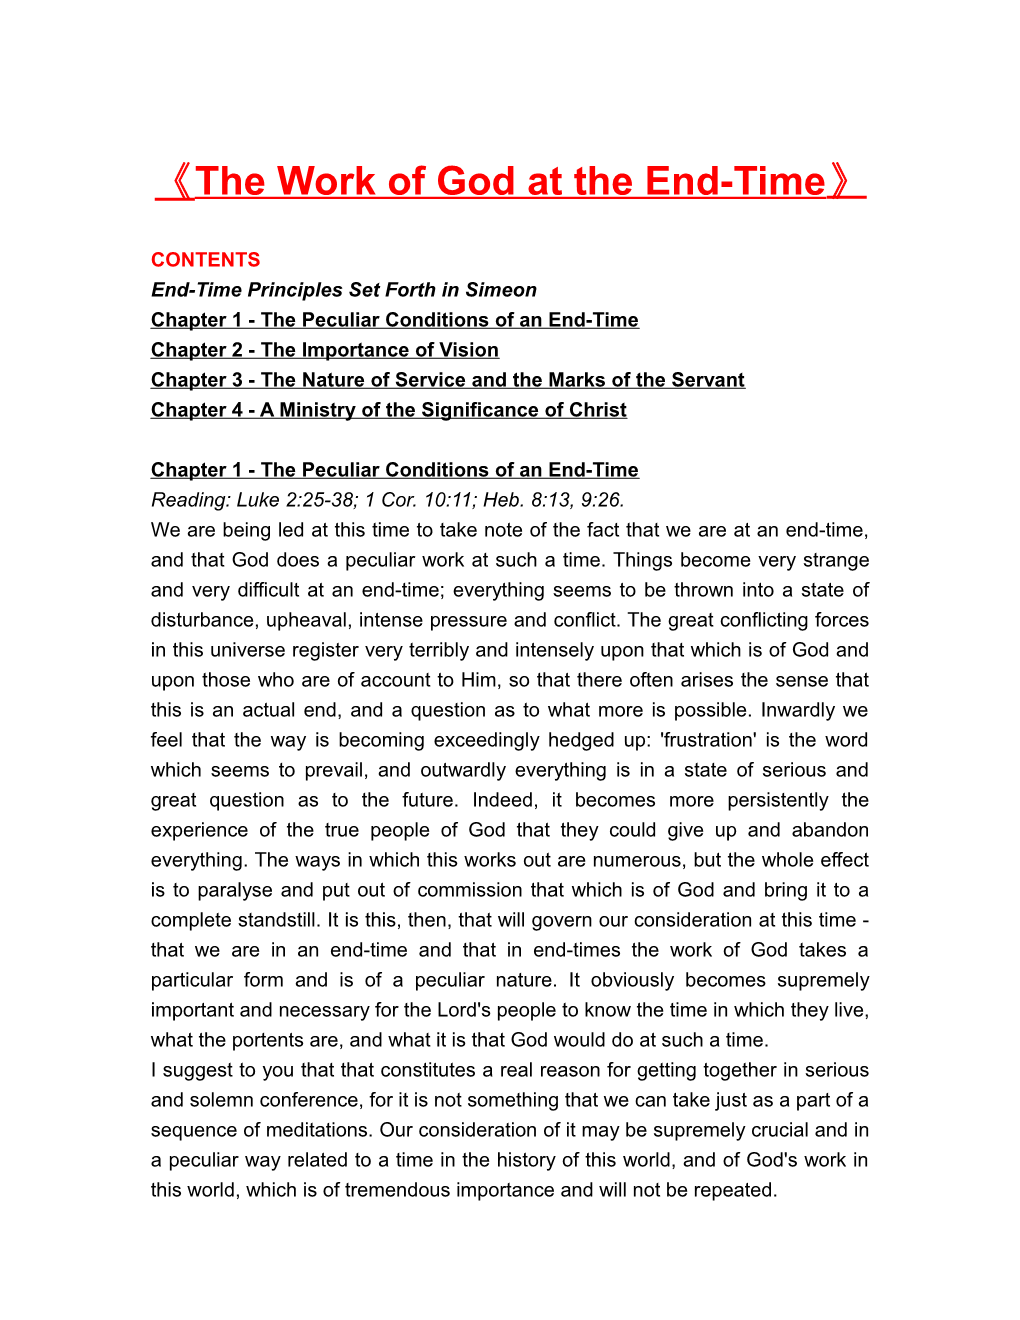 The Work of God at the End-Time